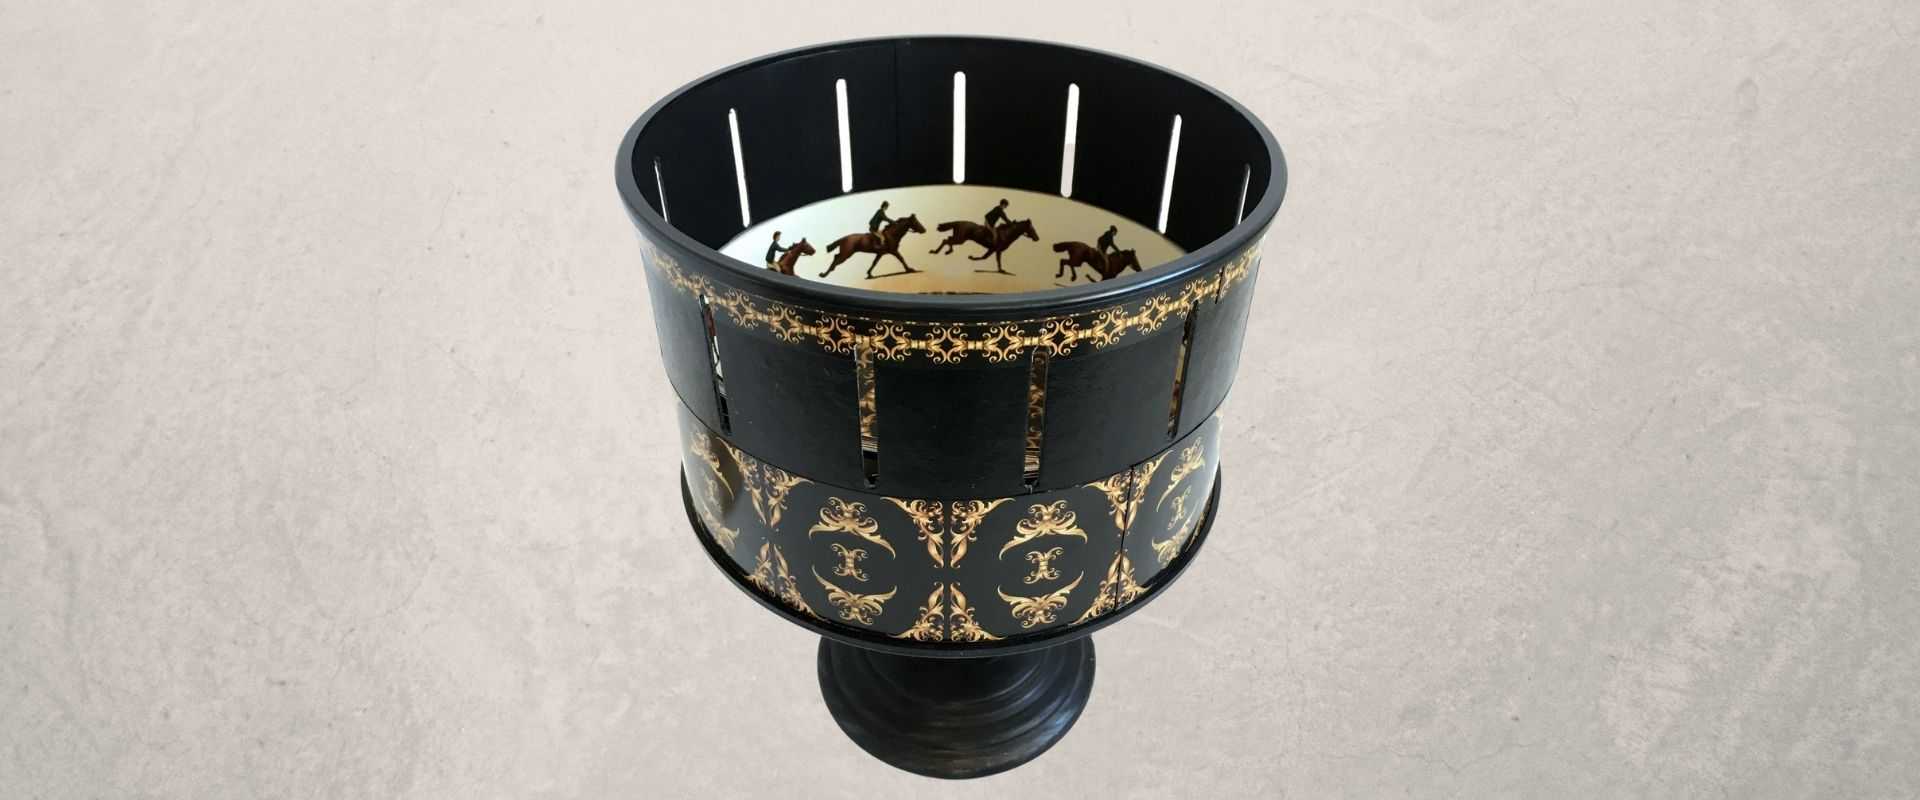 Zoetrope is an ancient form of animation technology